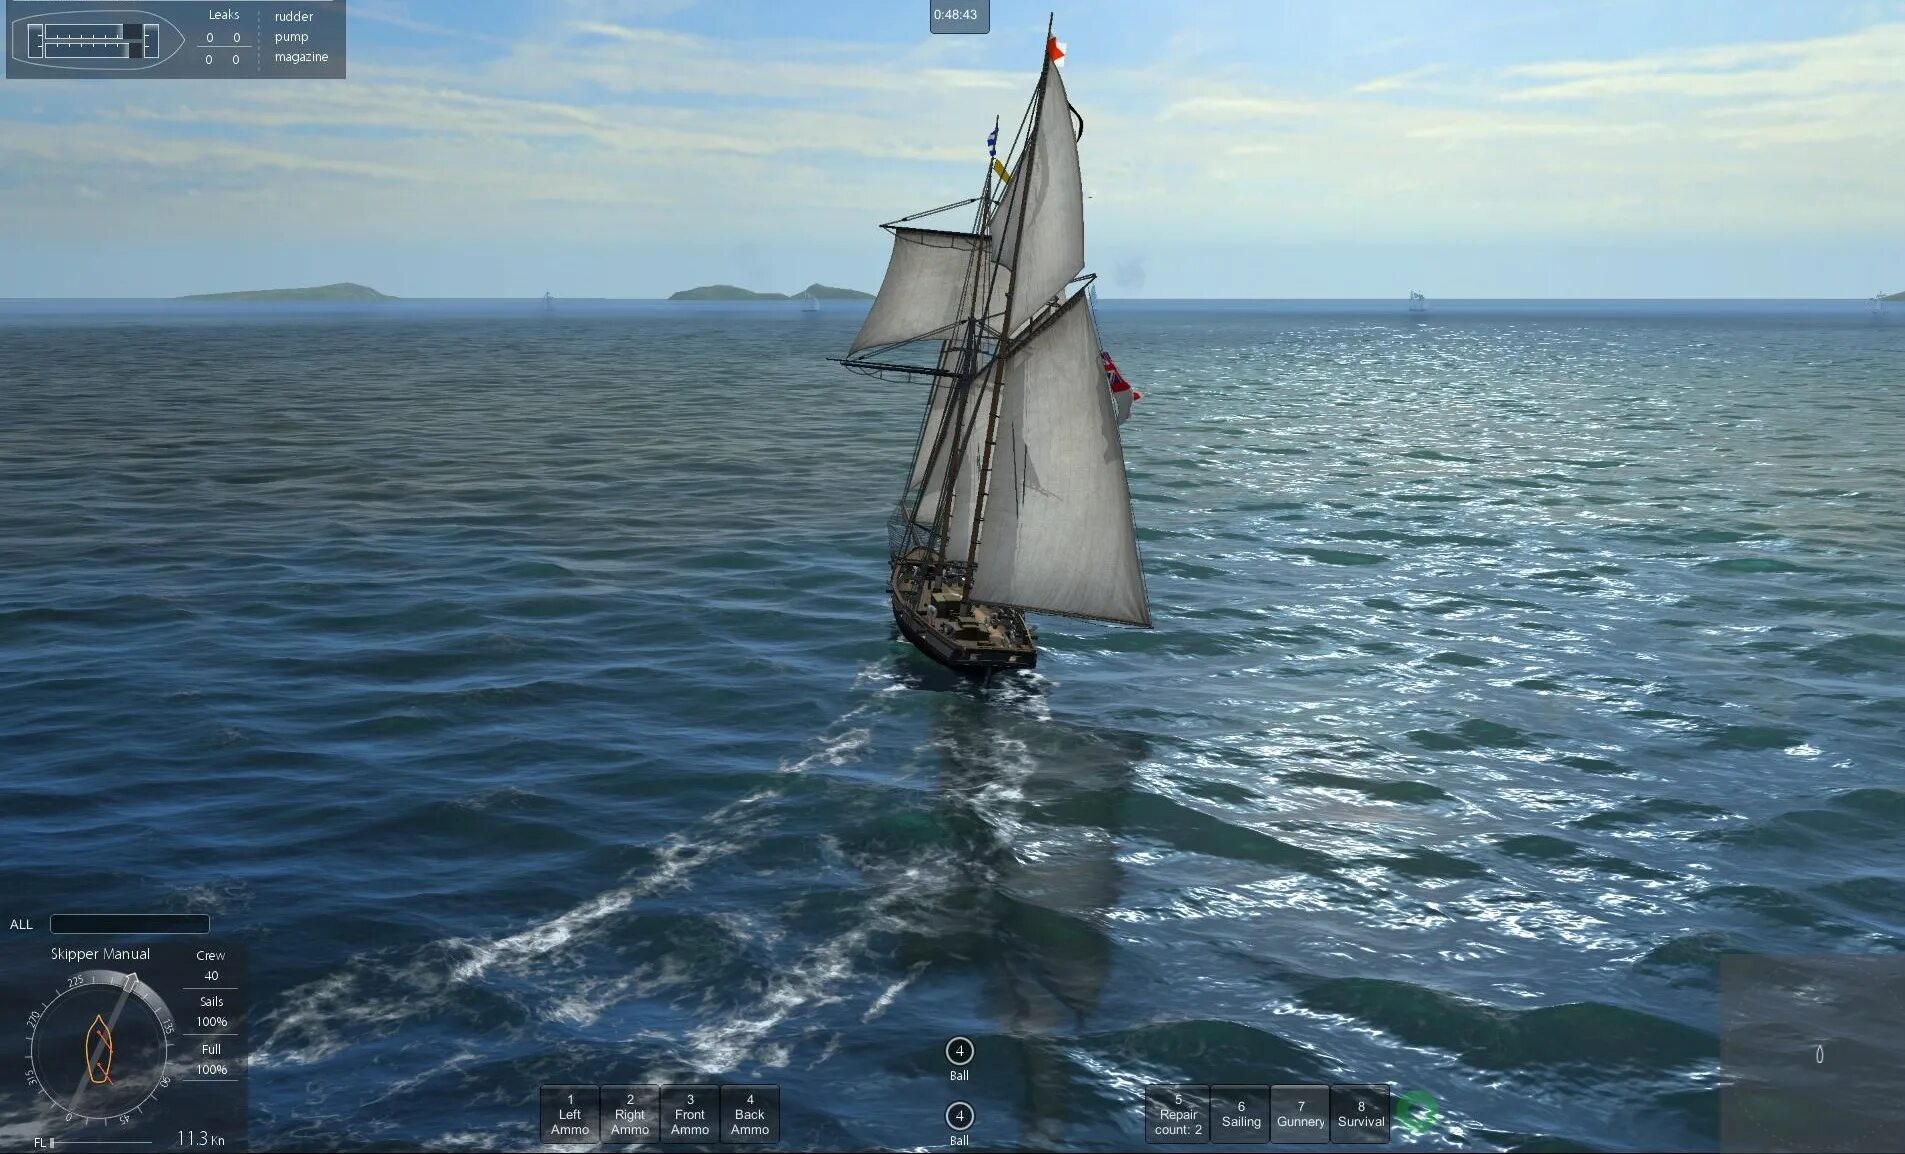 Age of water дата выхода. Age of Water игра. Игры про море Naval Action. Age of Water геймплей. Age of Sail II Акелла.